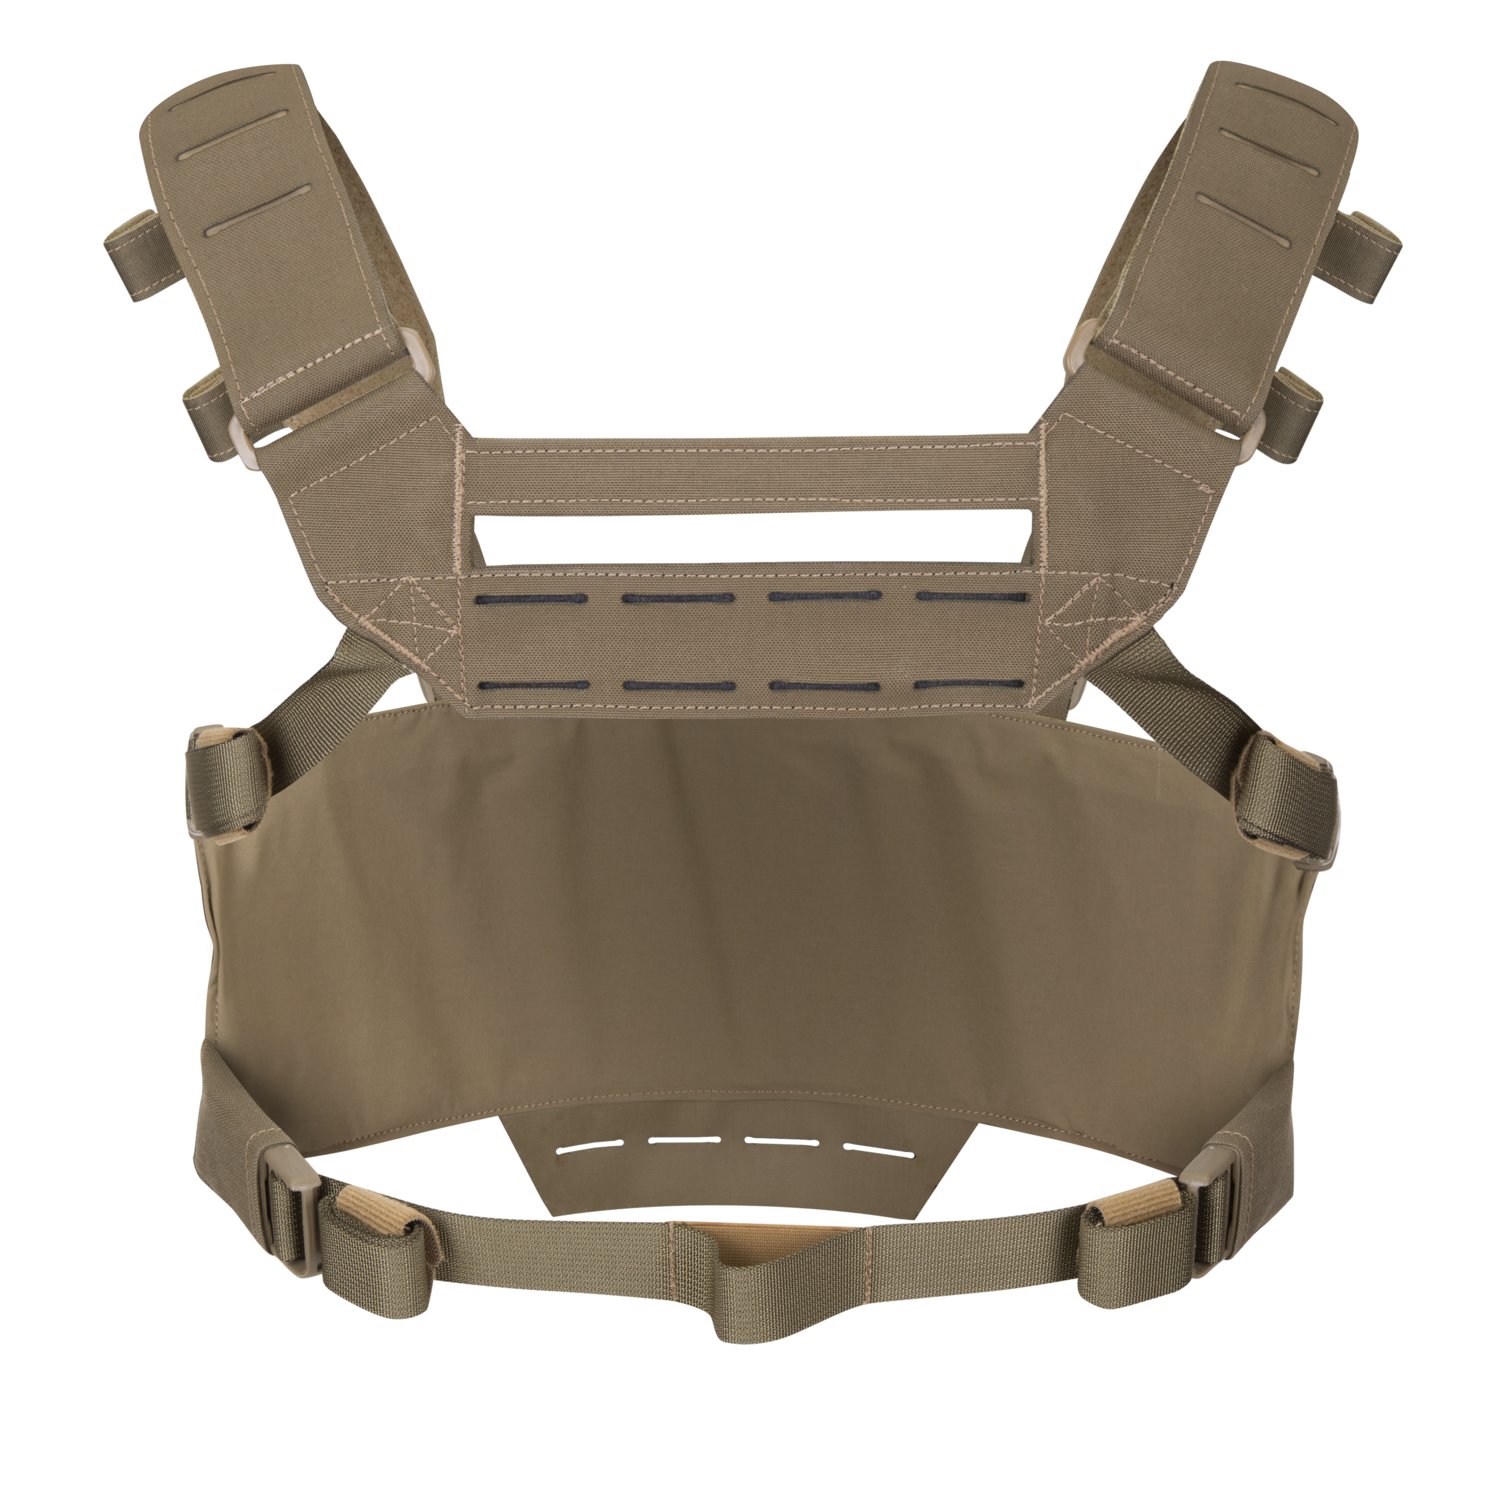 Warwick Slick Chest Rig | On Duty Equipment Contract Division